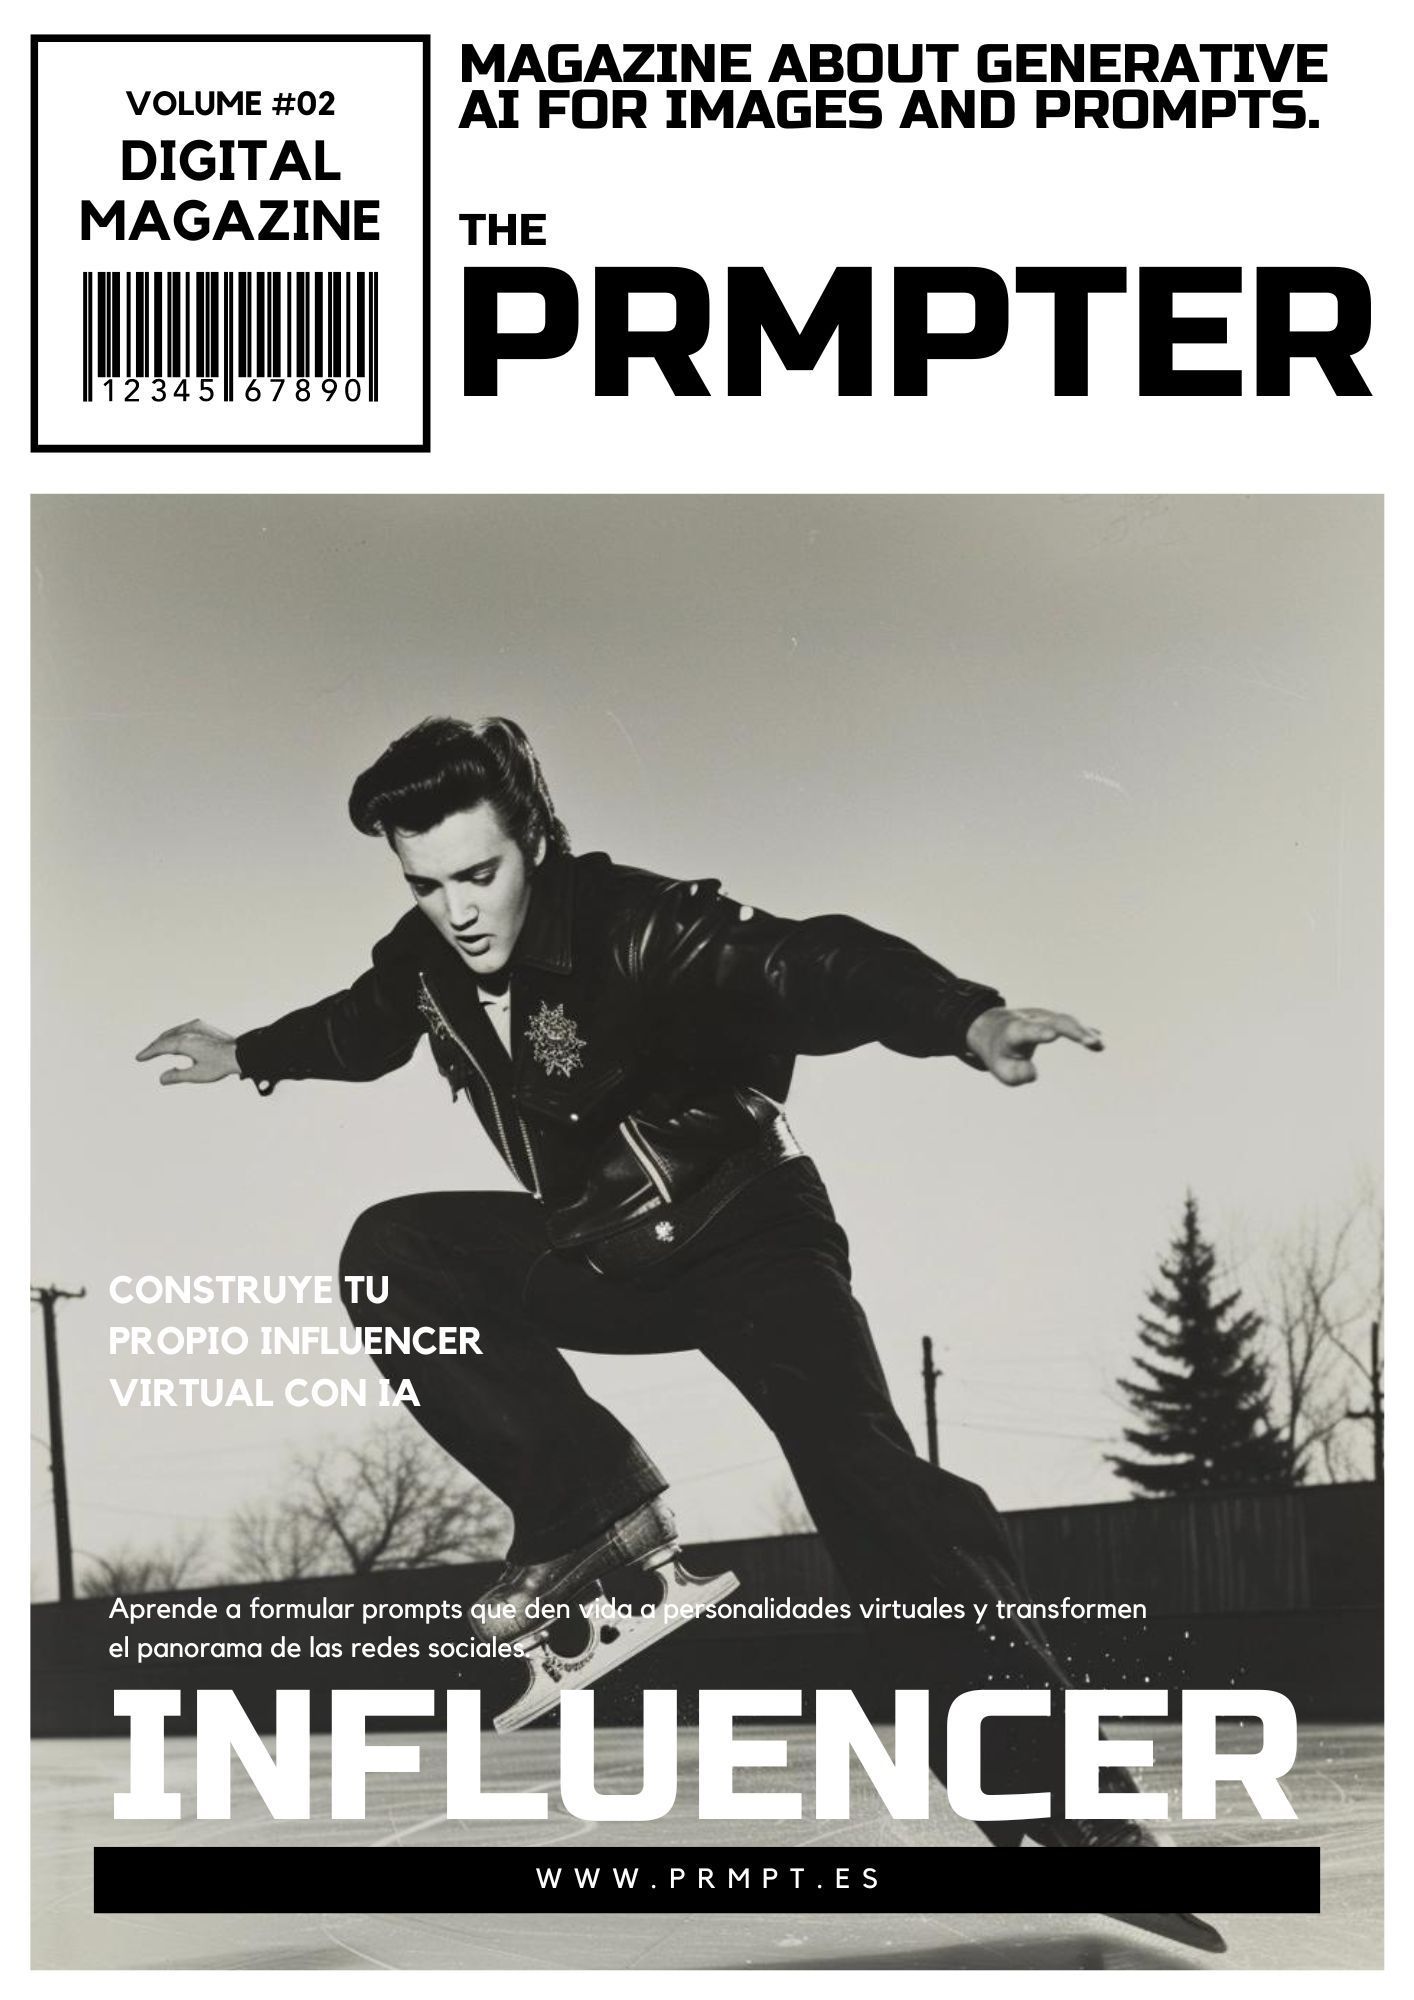 The prompter Magazine 02 